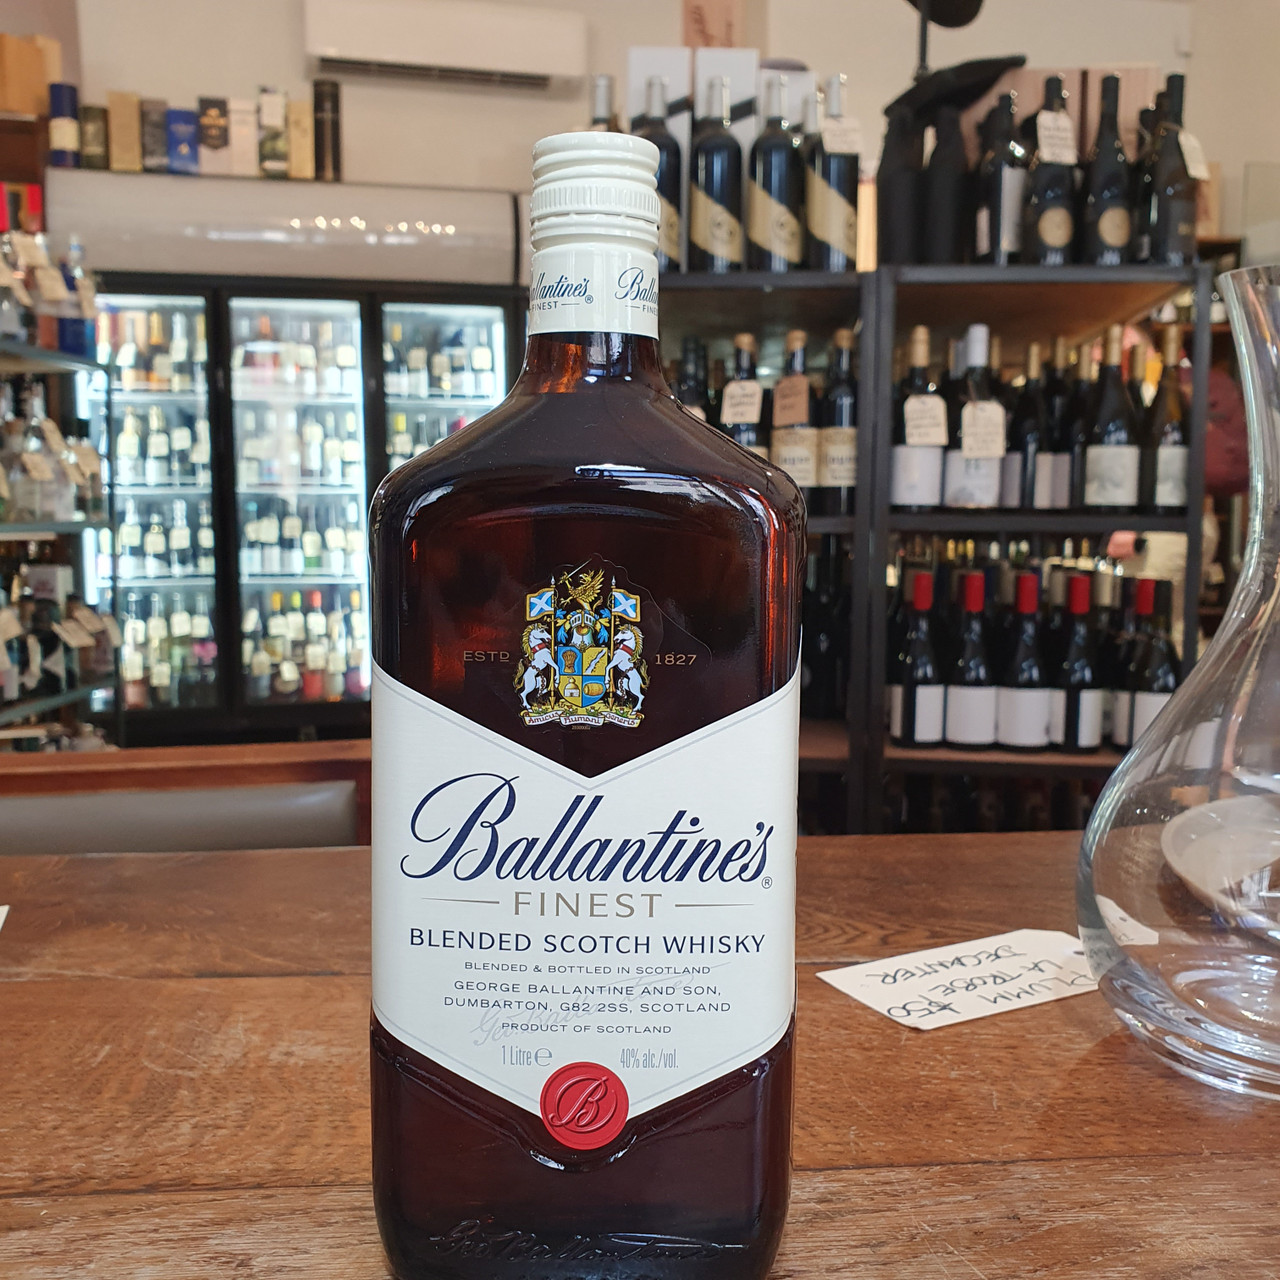 Ballantines Blended Scotch Whisky 1000 ml - Cahns Wines & Spirits